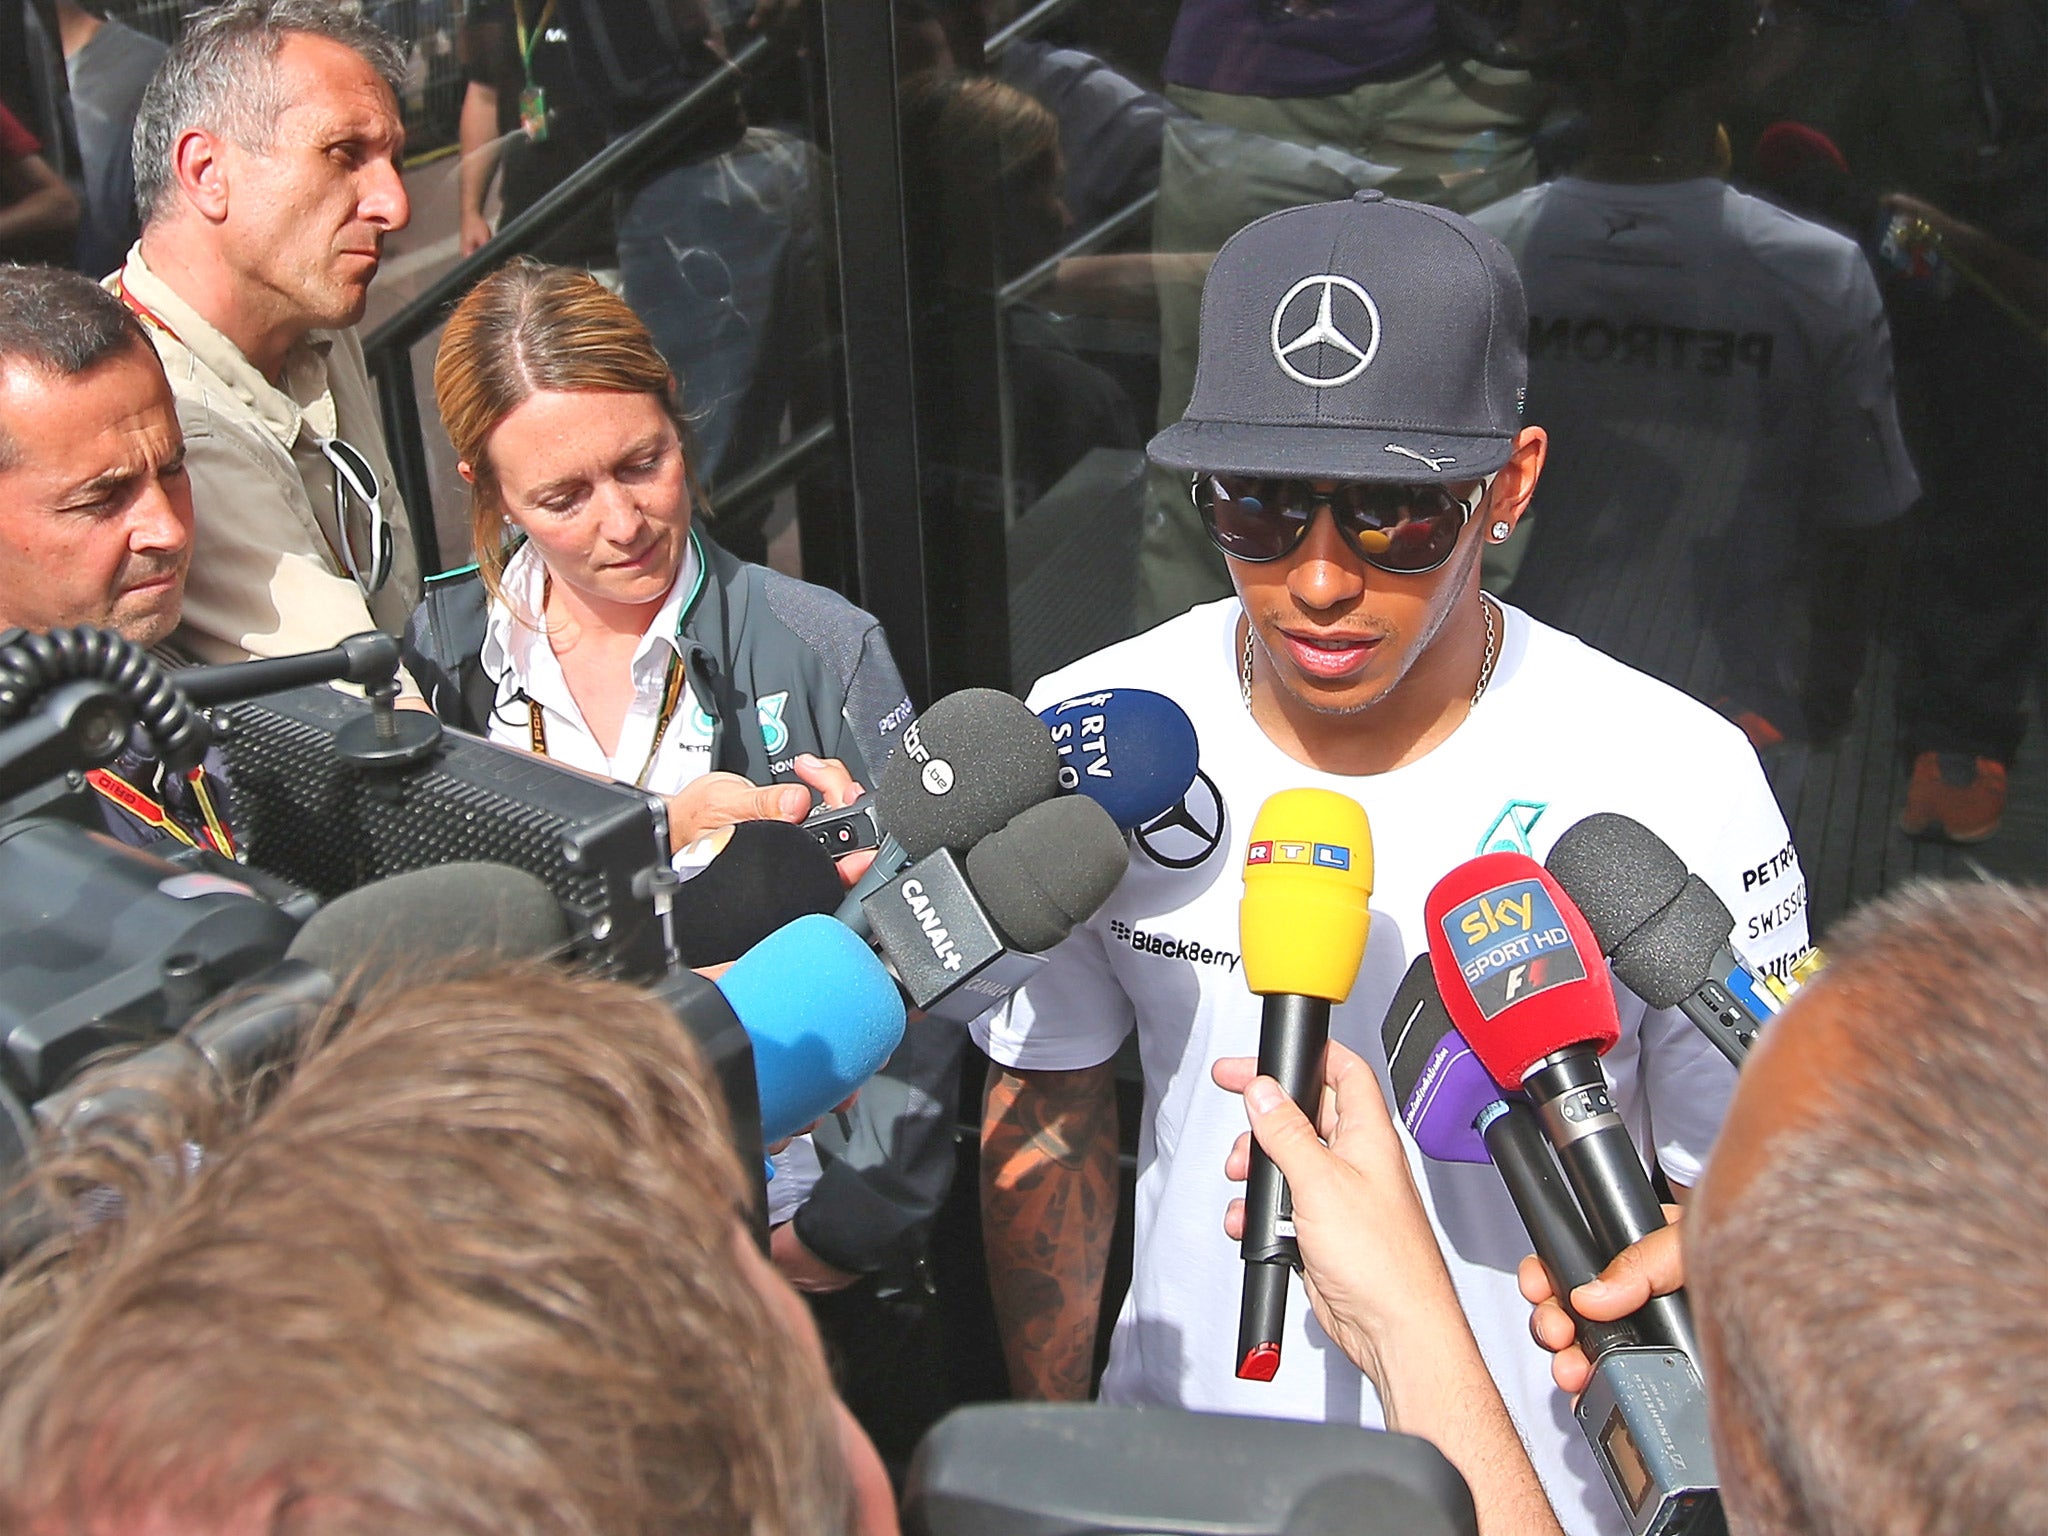 ‘I honestly never expected to win four consecutive grands prix,’ admitted Lewis Hamilton